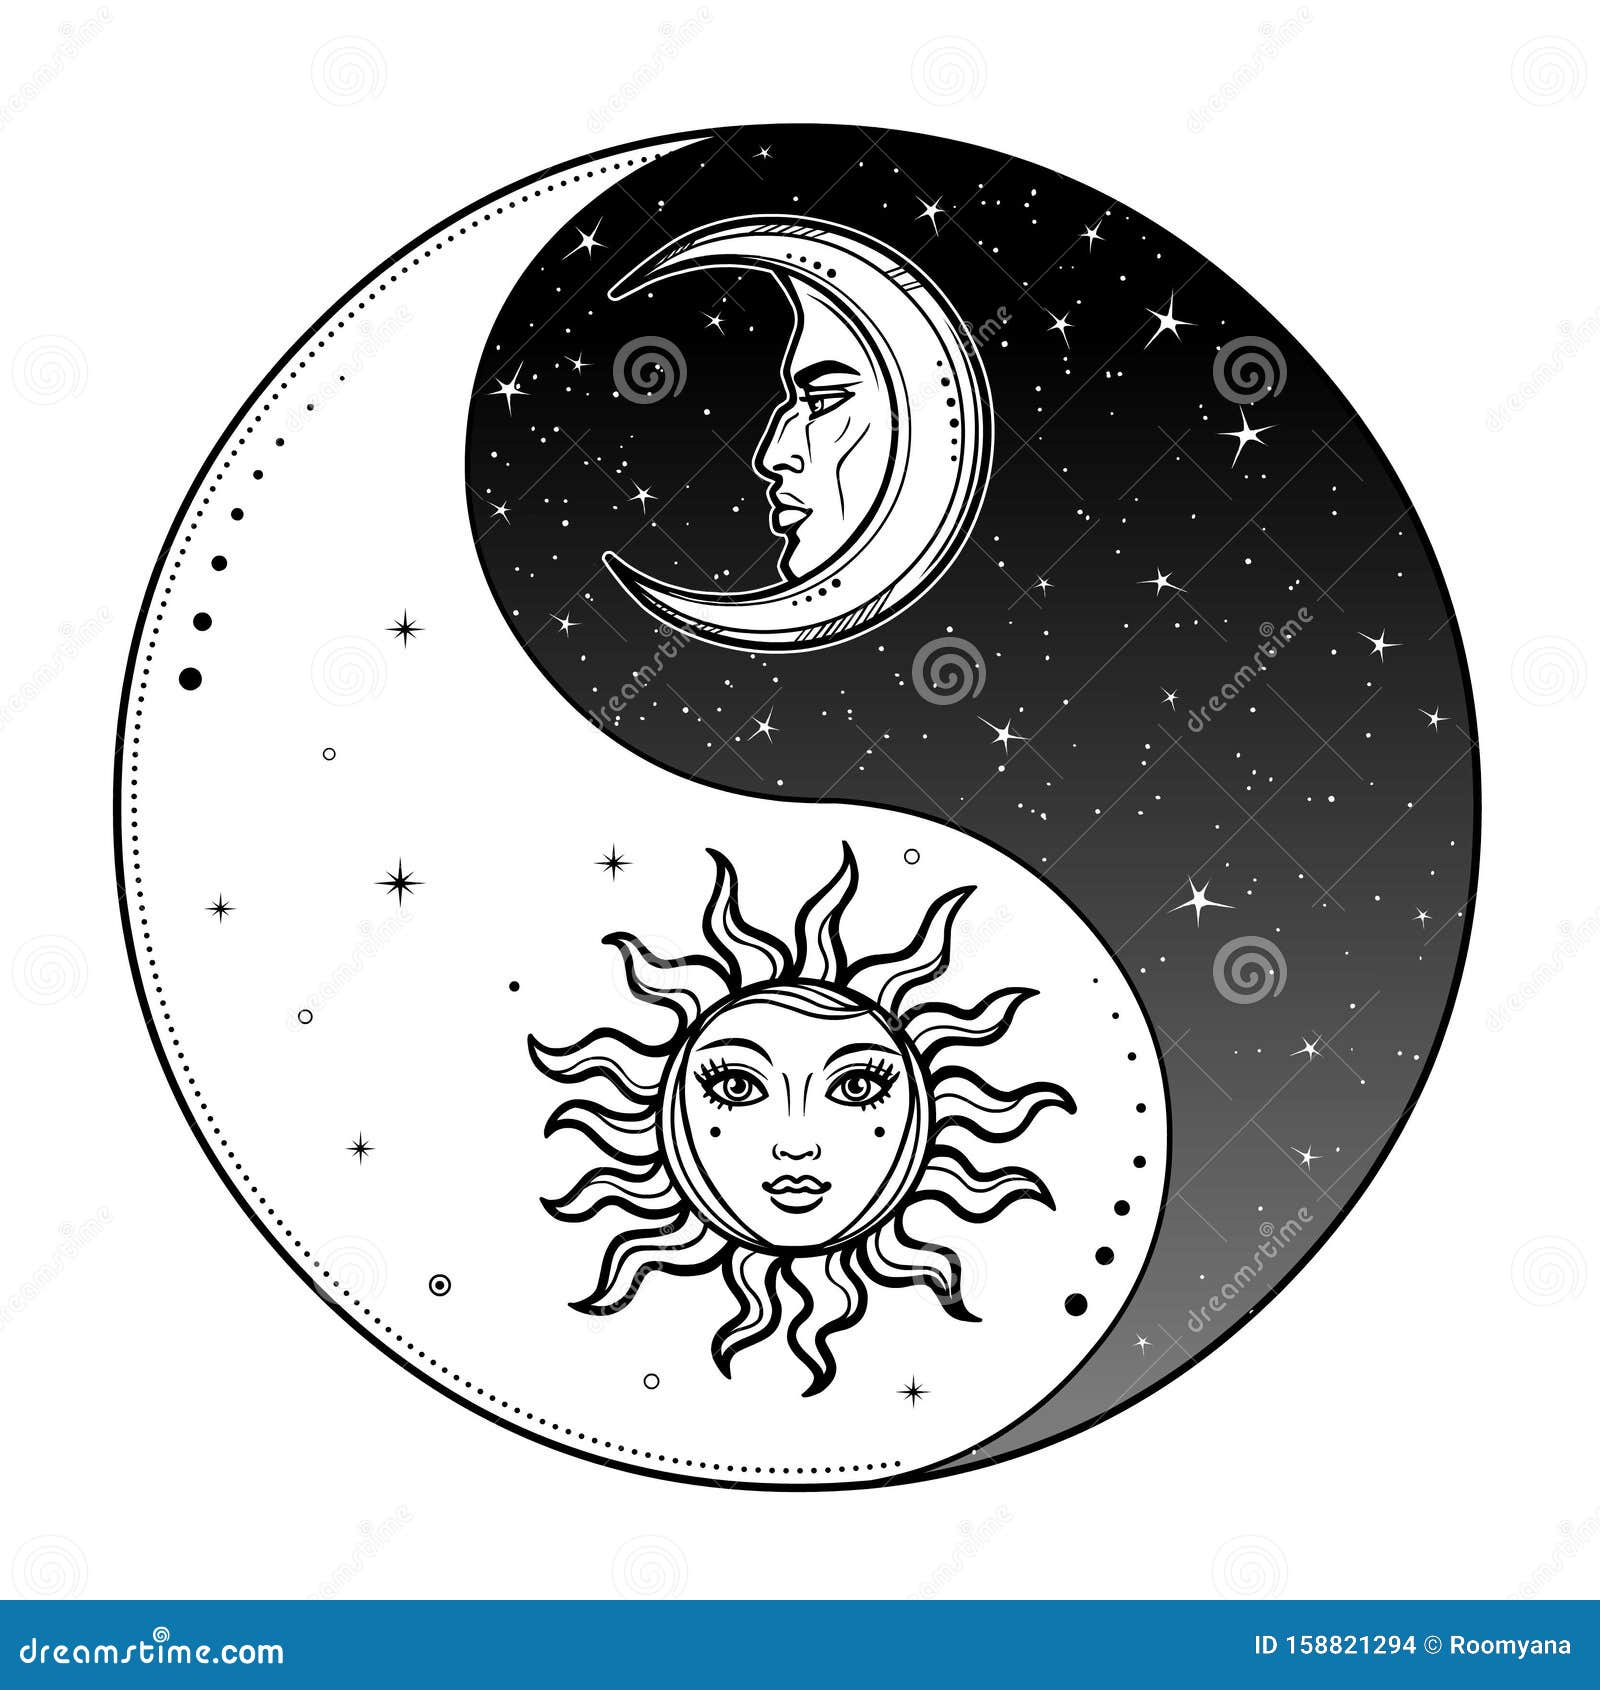 mystical drawing: stylized sun and moon with human face, day and night.